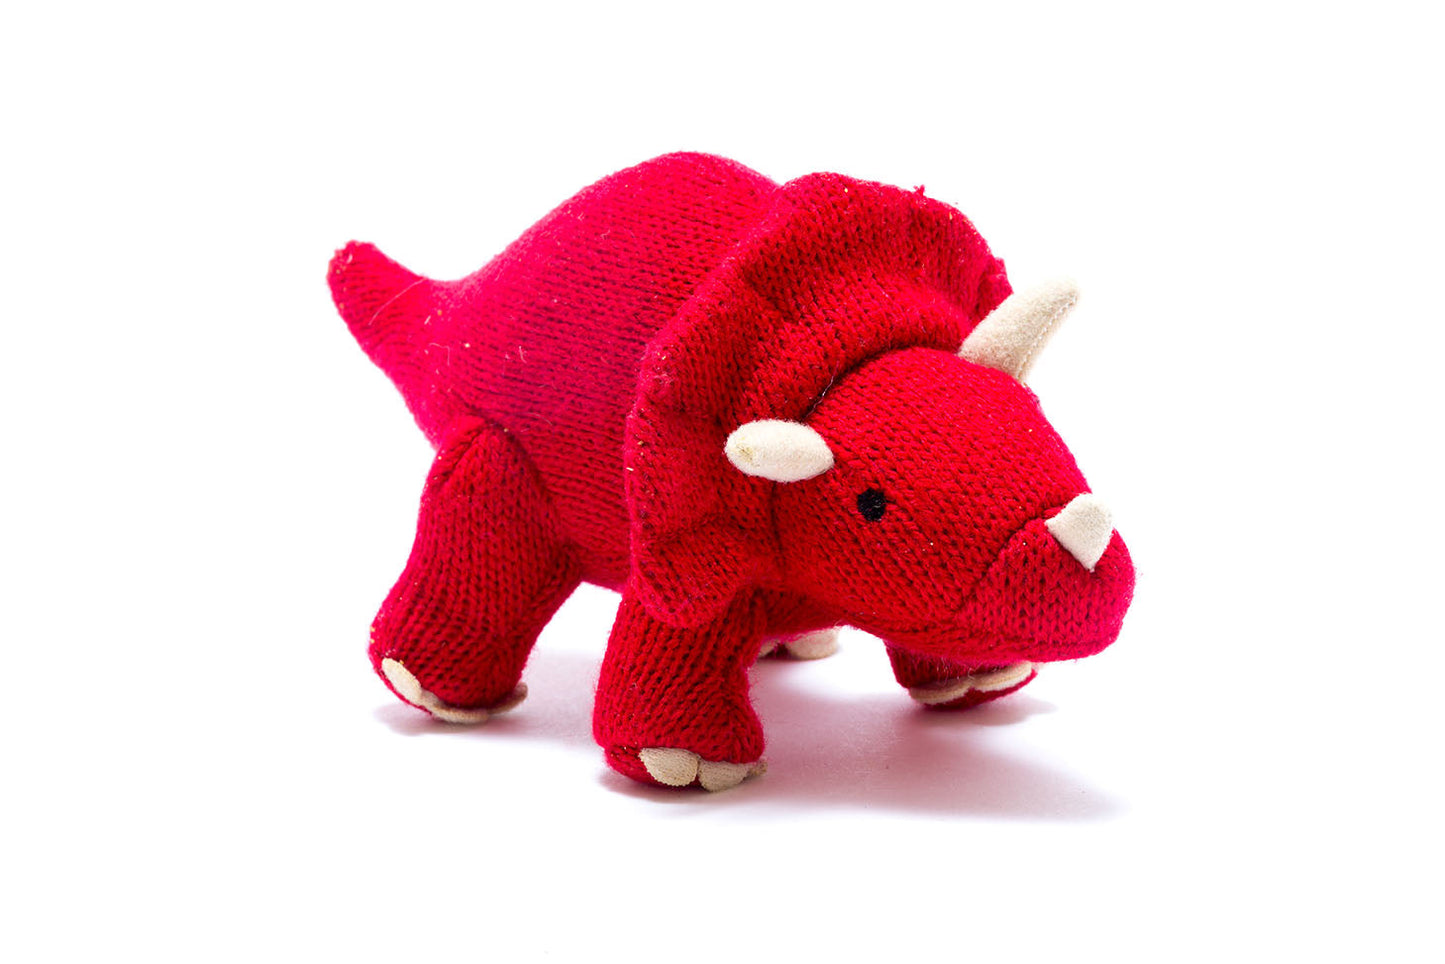 Red triceratops knitted toy against white background.